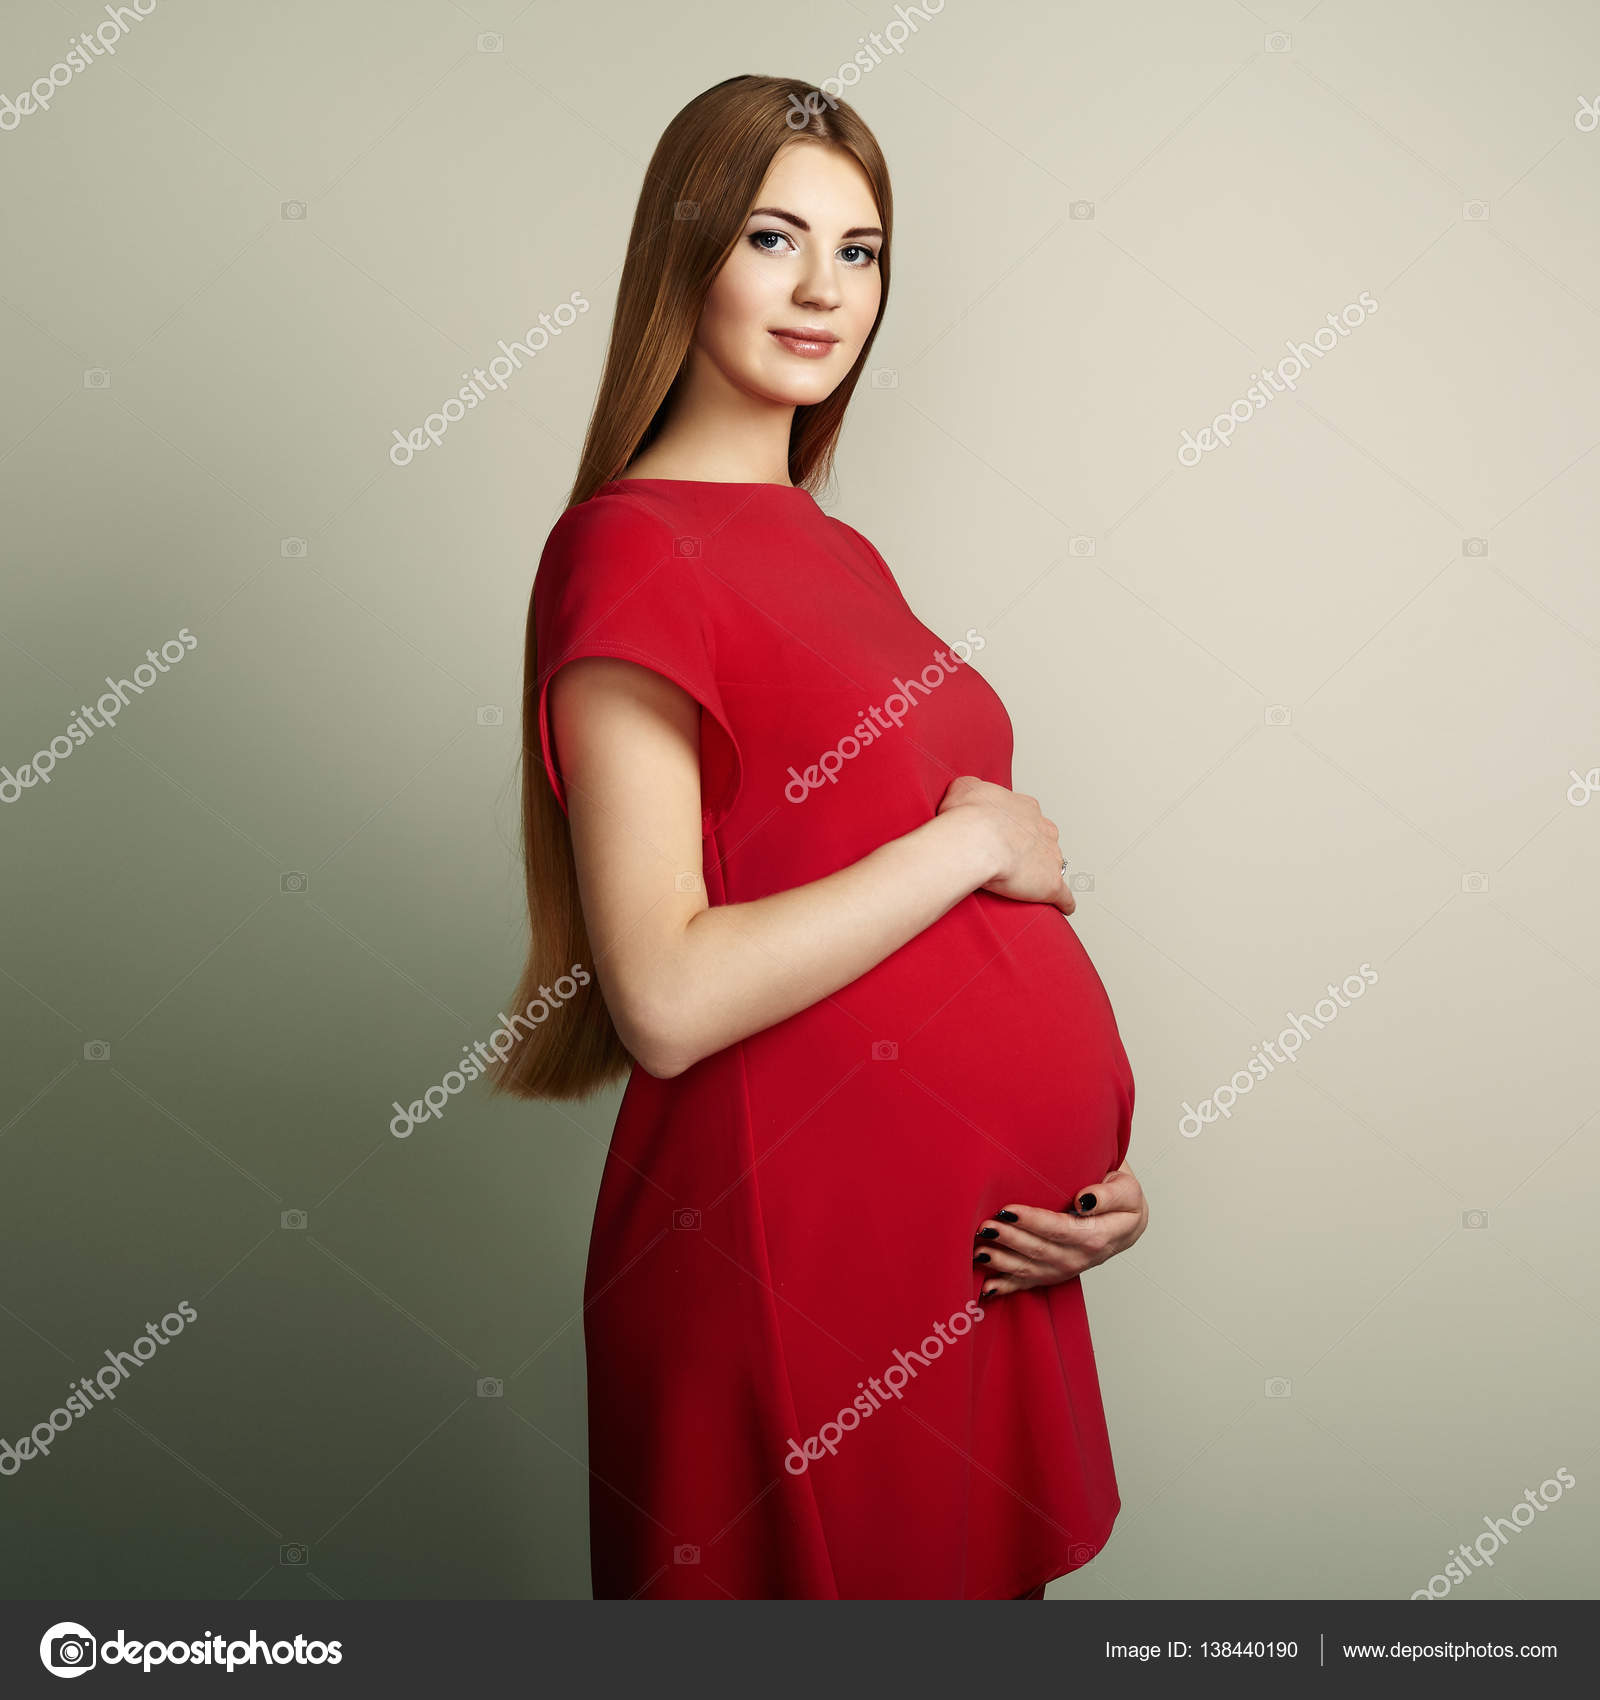 Portrait of the young pregnant woman — Stock Photo © heckmannoleg ...